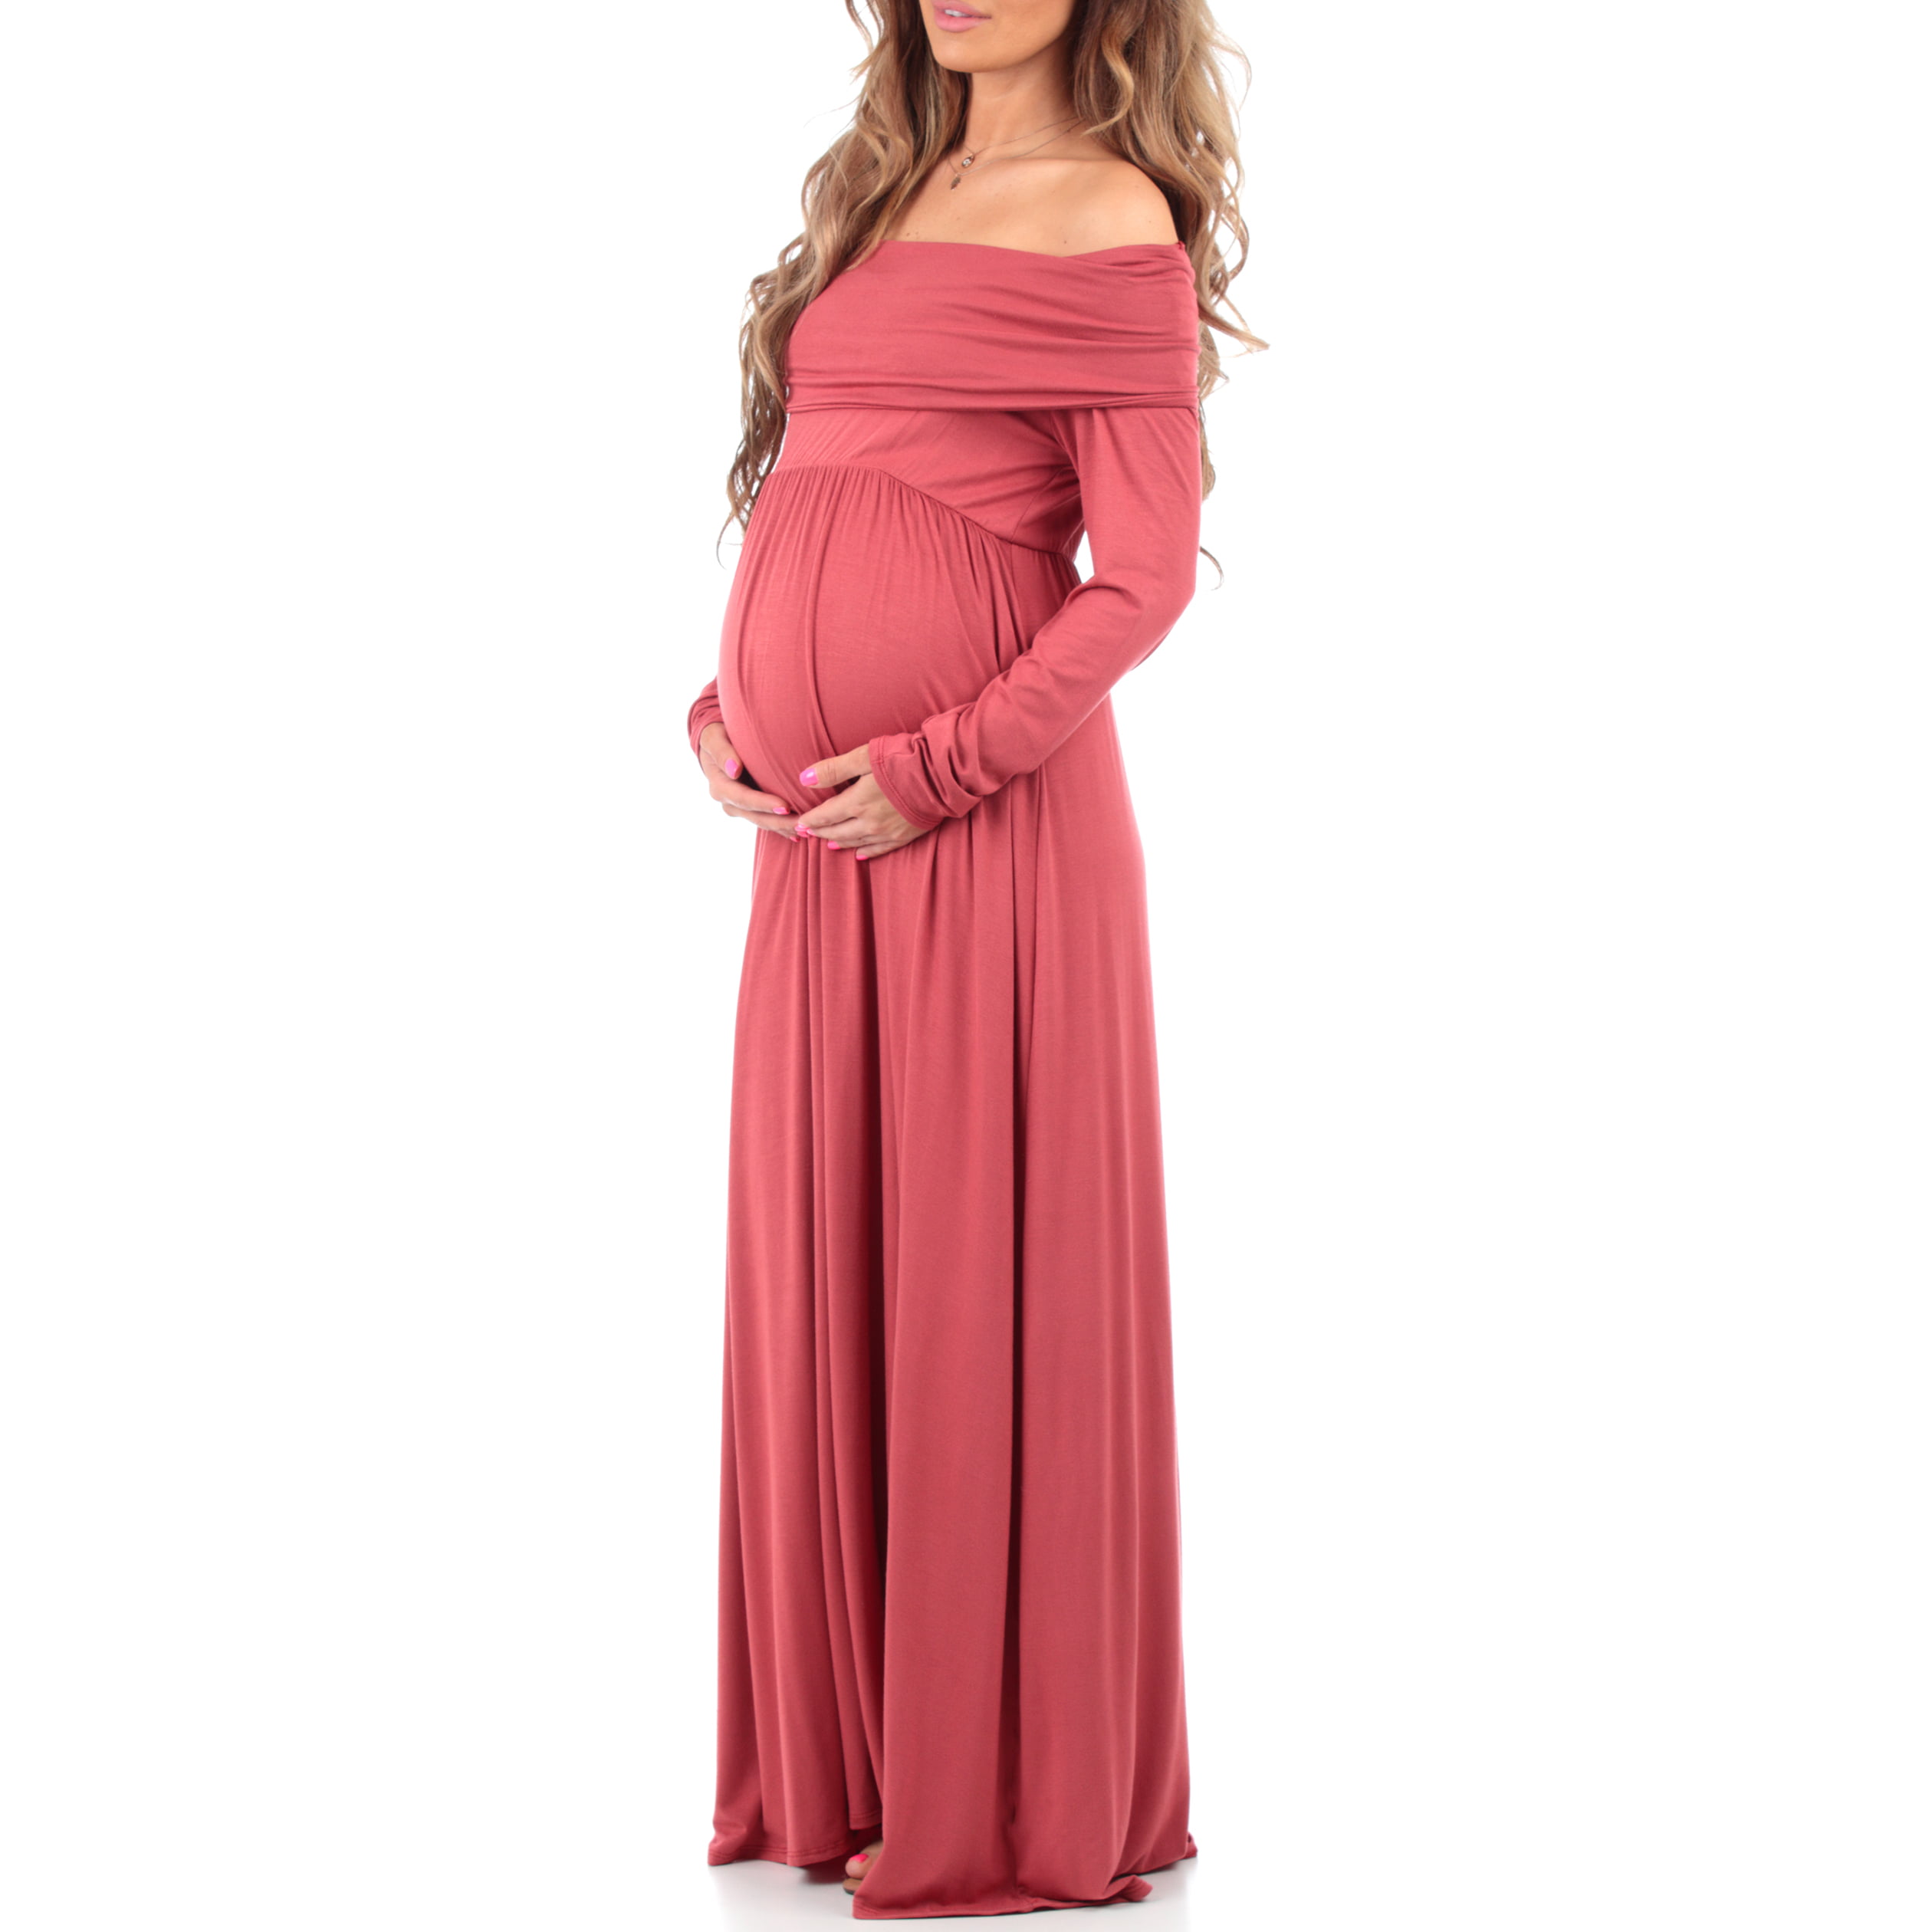 Cowl Neck and Over The Shoulder Maternity Dress 